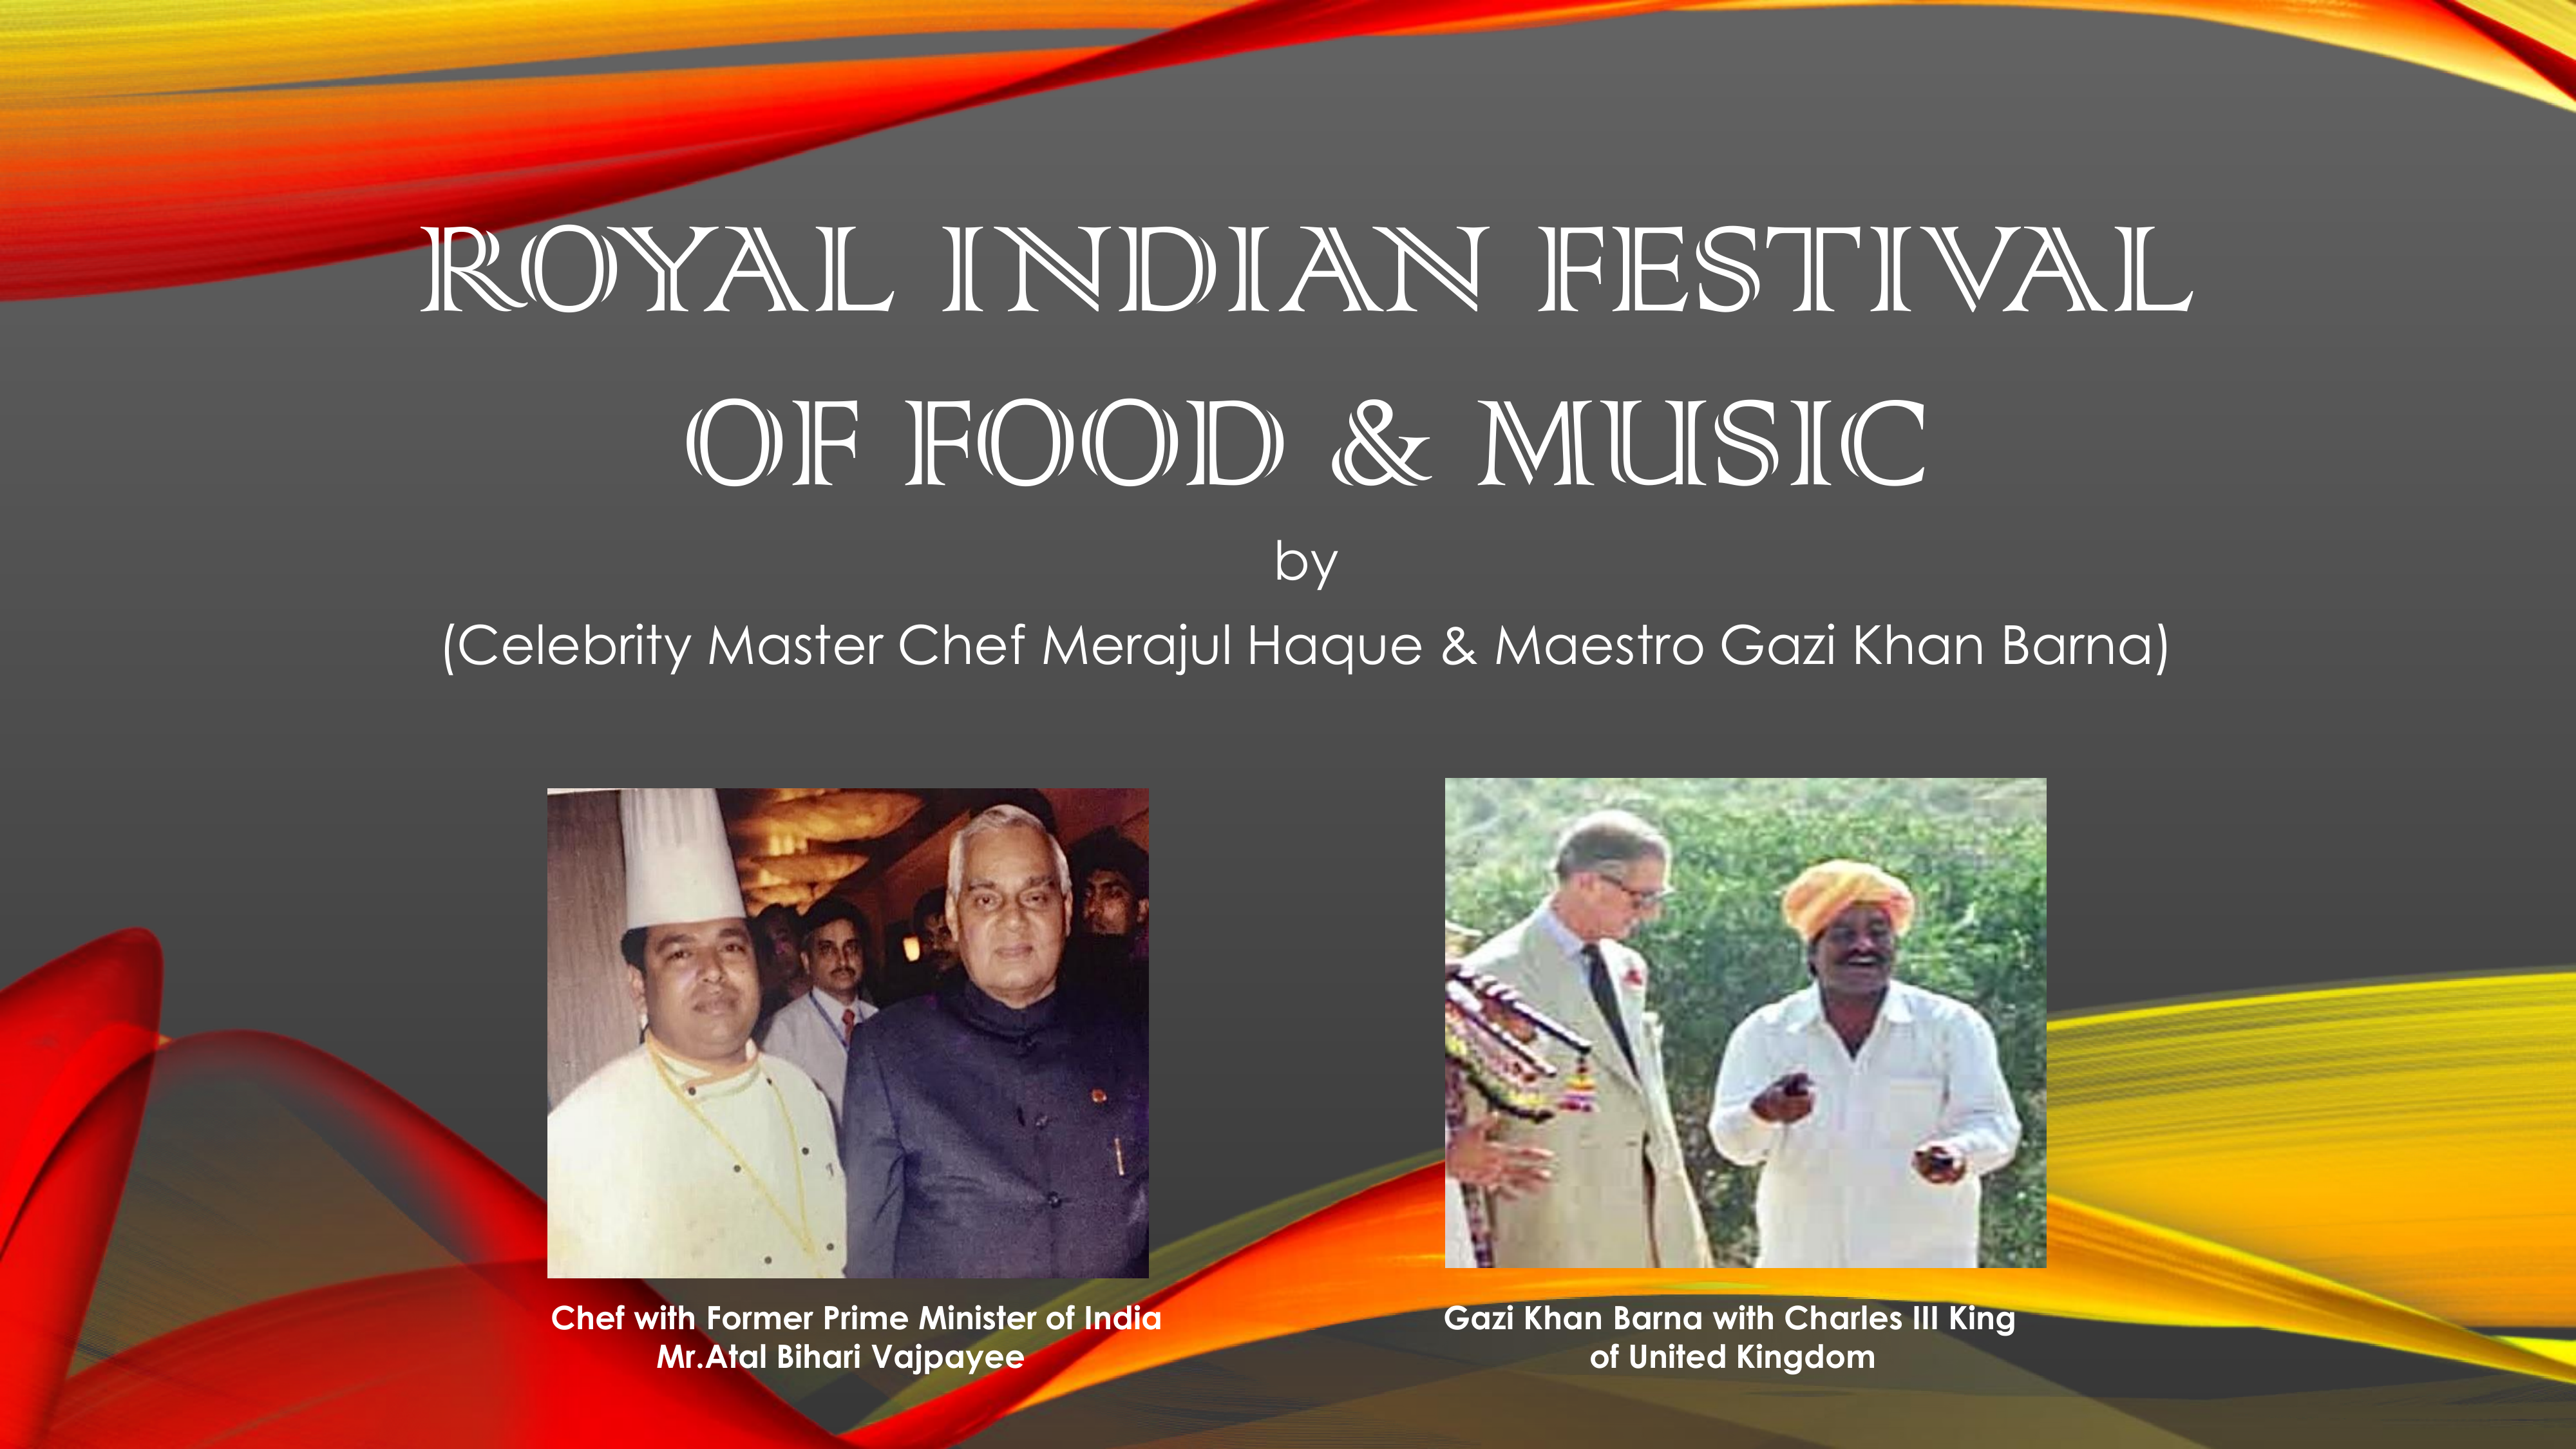 ROYAL INDIAN FESTIVAL OF FOOD & MUSIC-1 (1)